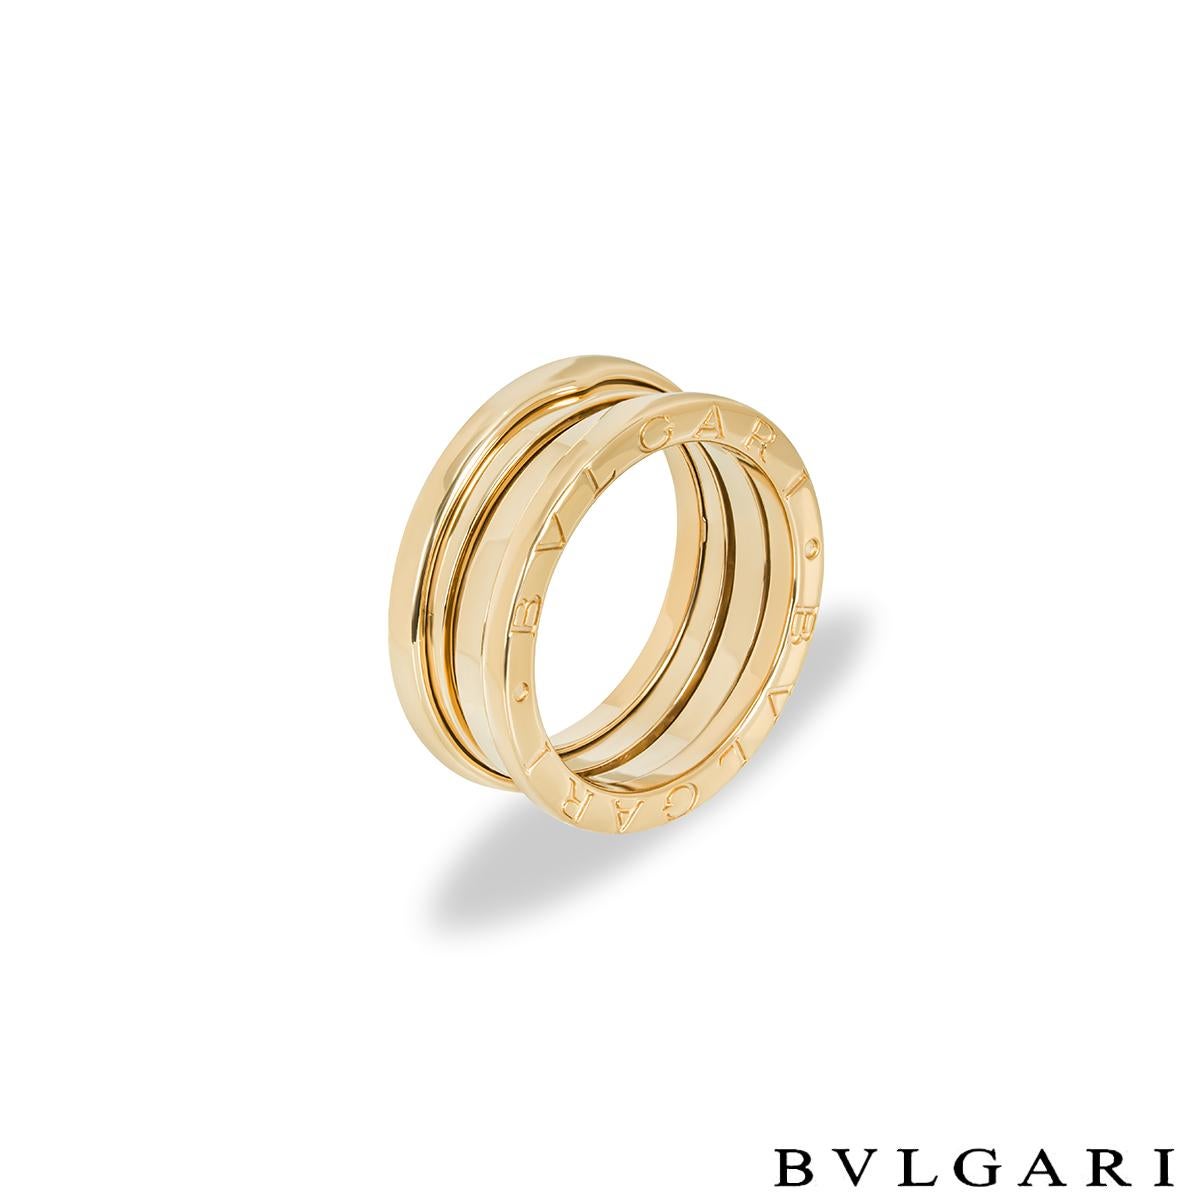 A classic 18k yellow gold ring by Bvlgari from the B.Zero1 collection. The ring comprises of 3 spiral design bands with the iconic 'Bvlgari Bvlgari' logo engraved around the outer edges. The ring is a UK size M/ USsize 6/ EU size 52 and has a gross